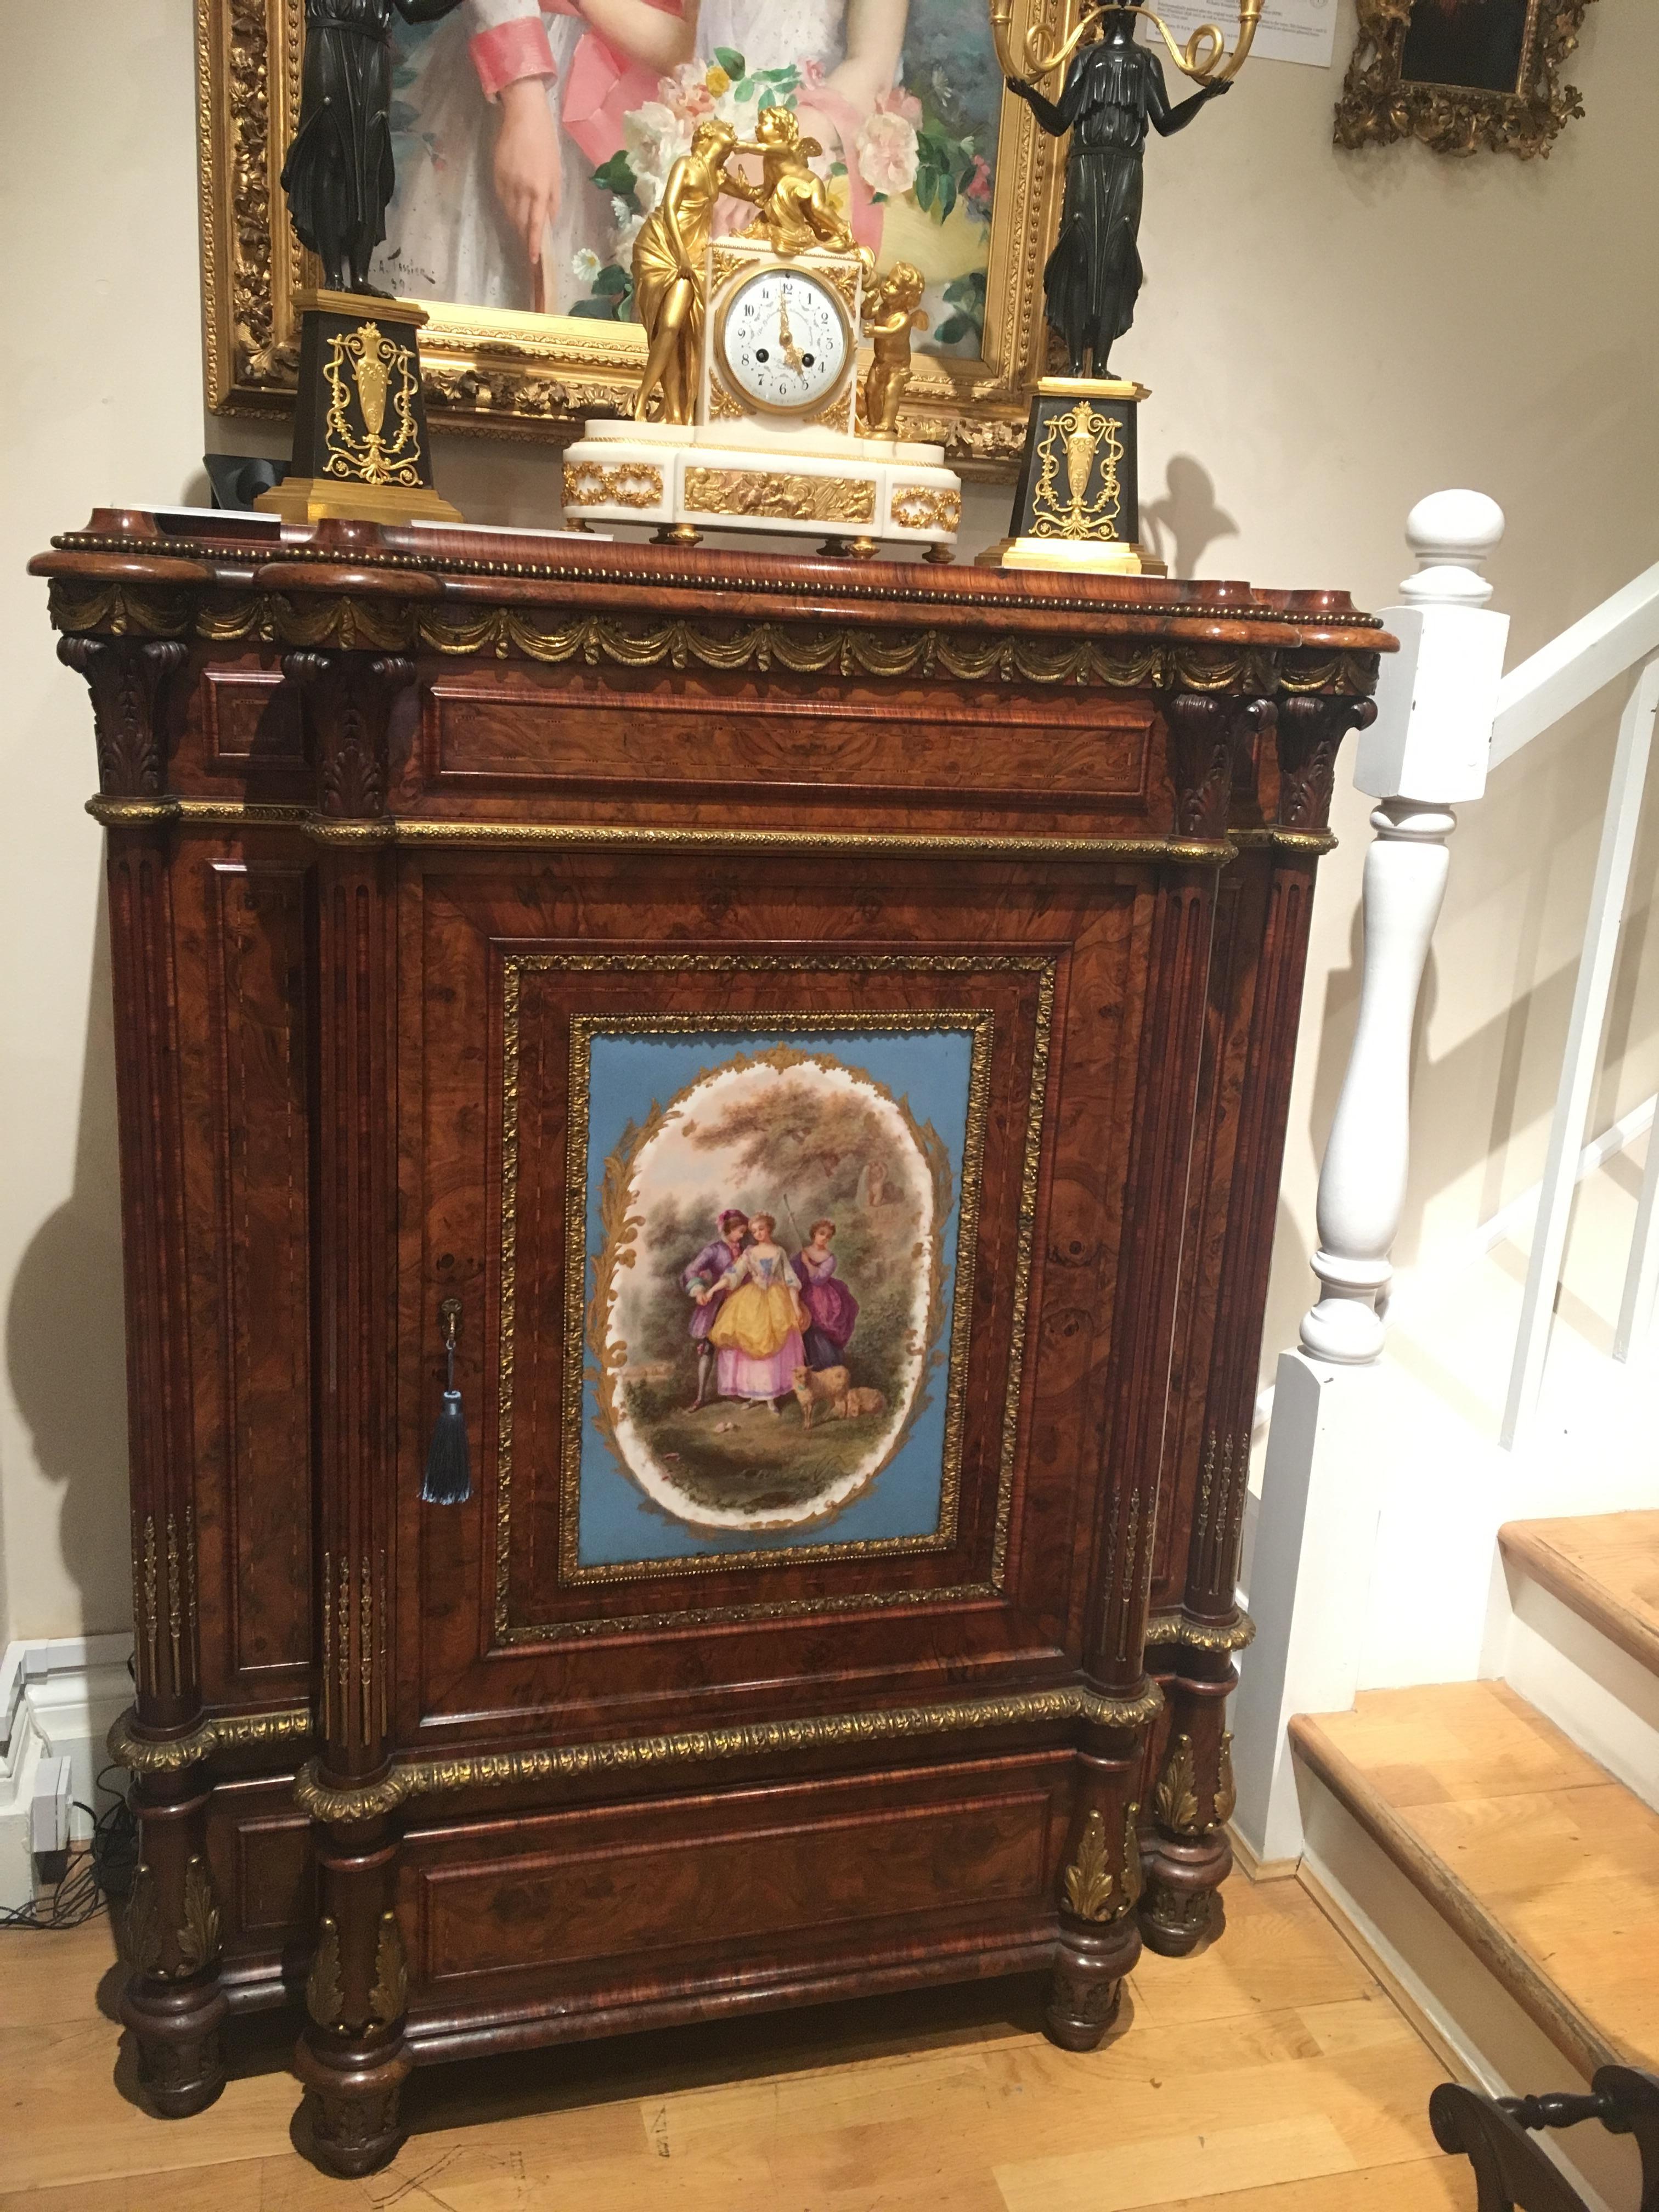 Victorian 19th Century English Walnut and Ormolu Cabinet with Sèvres Porcelain Plaque For Sale